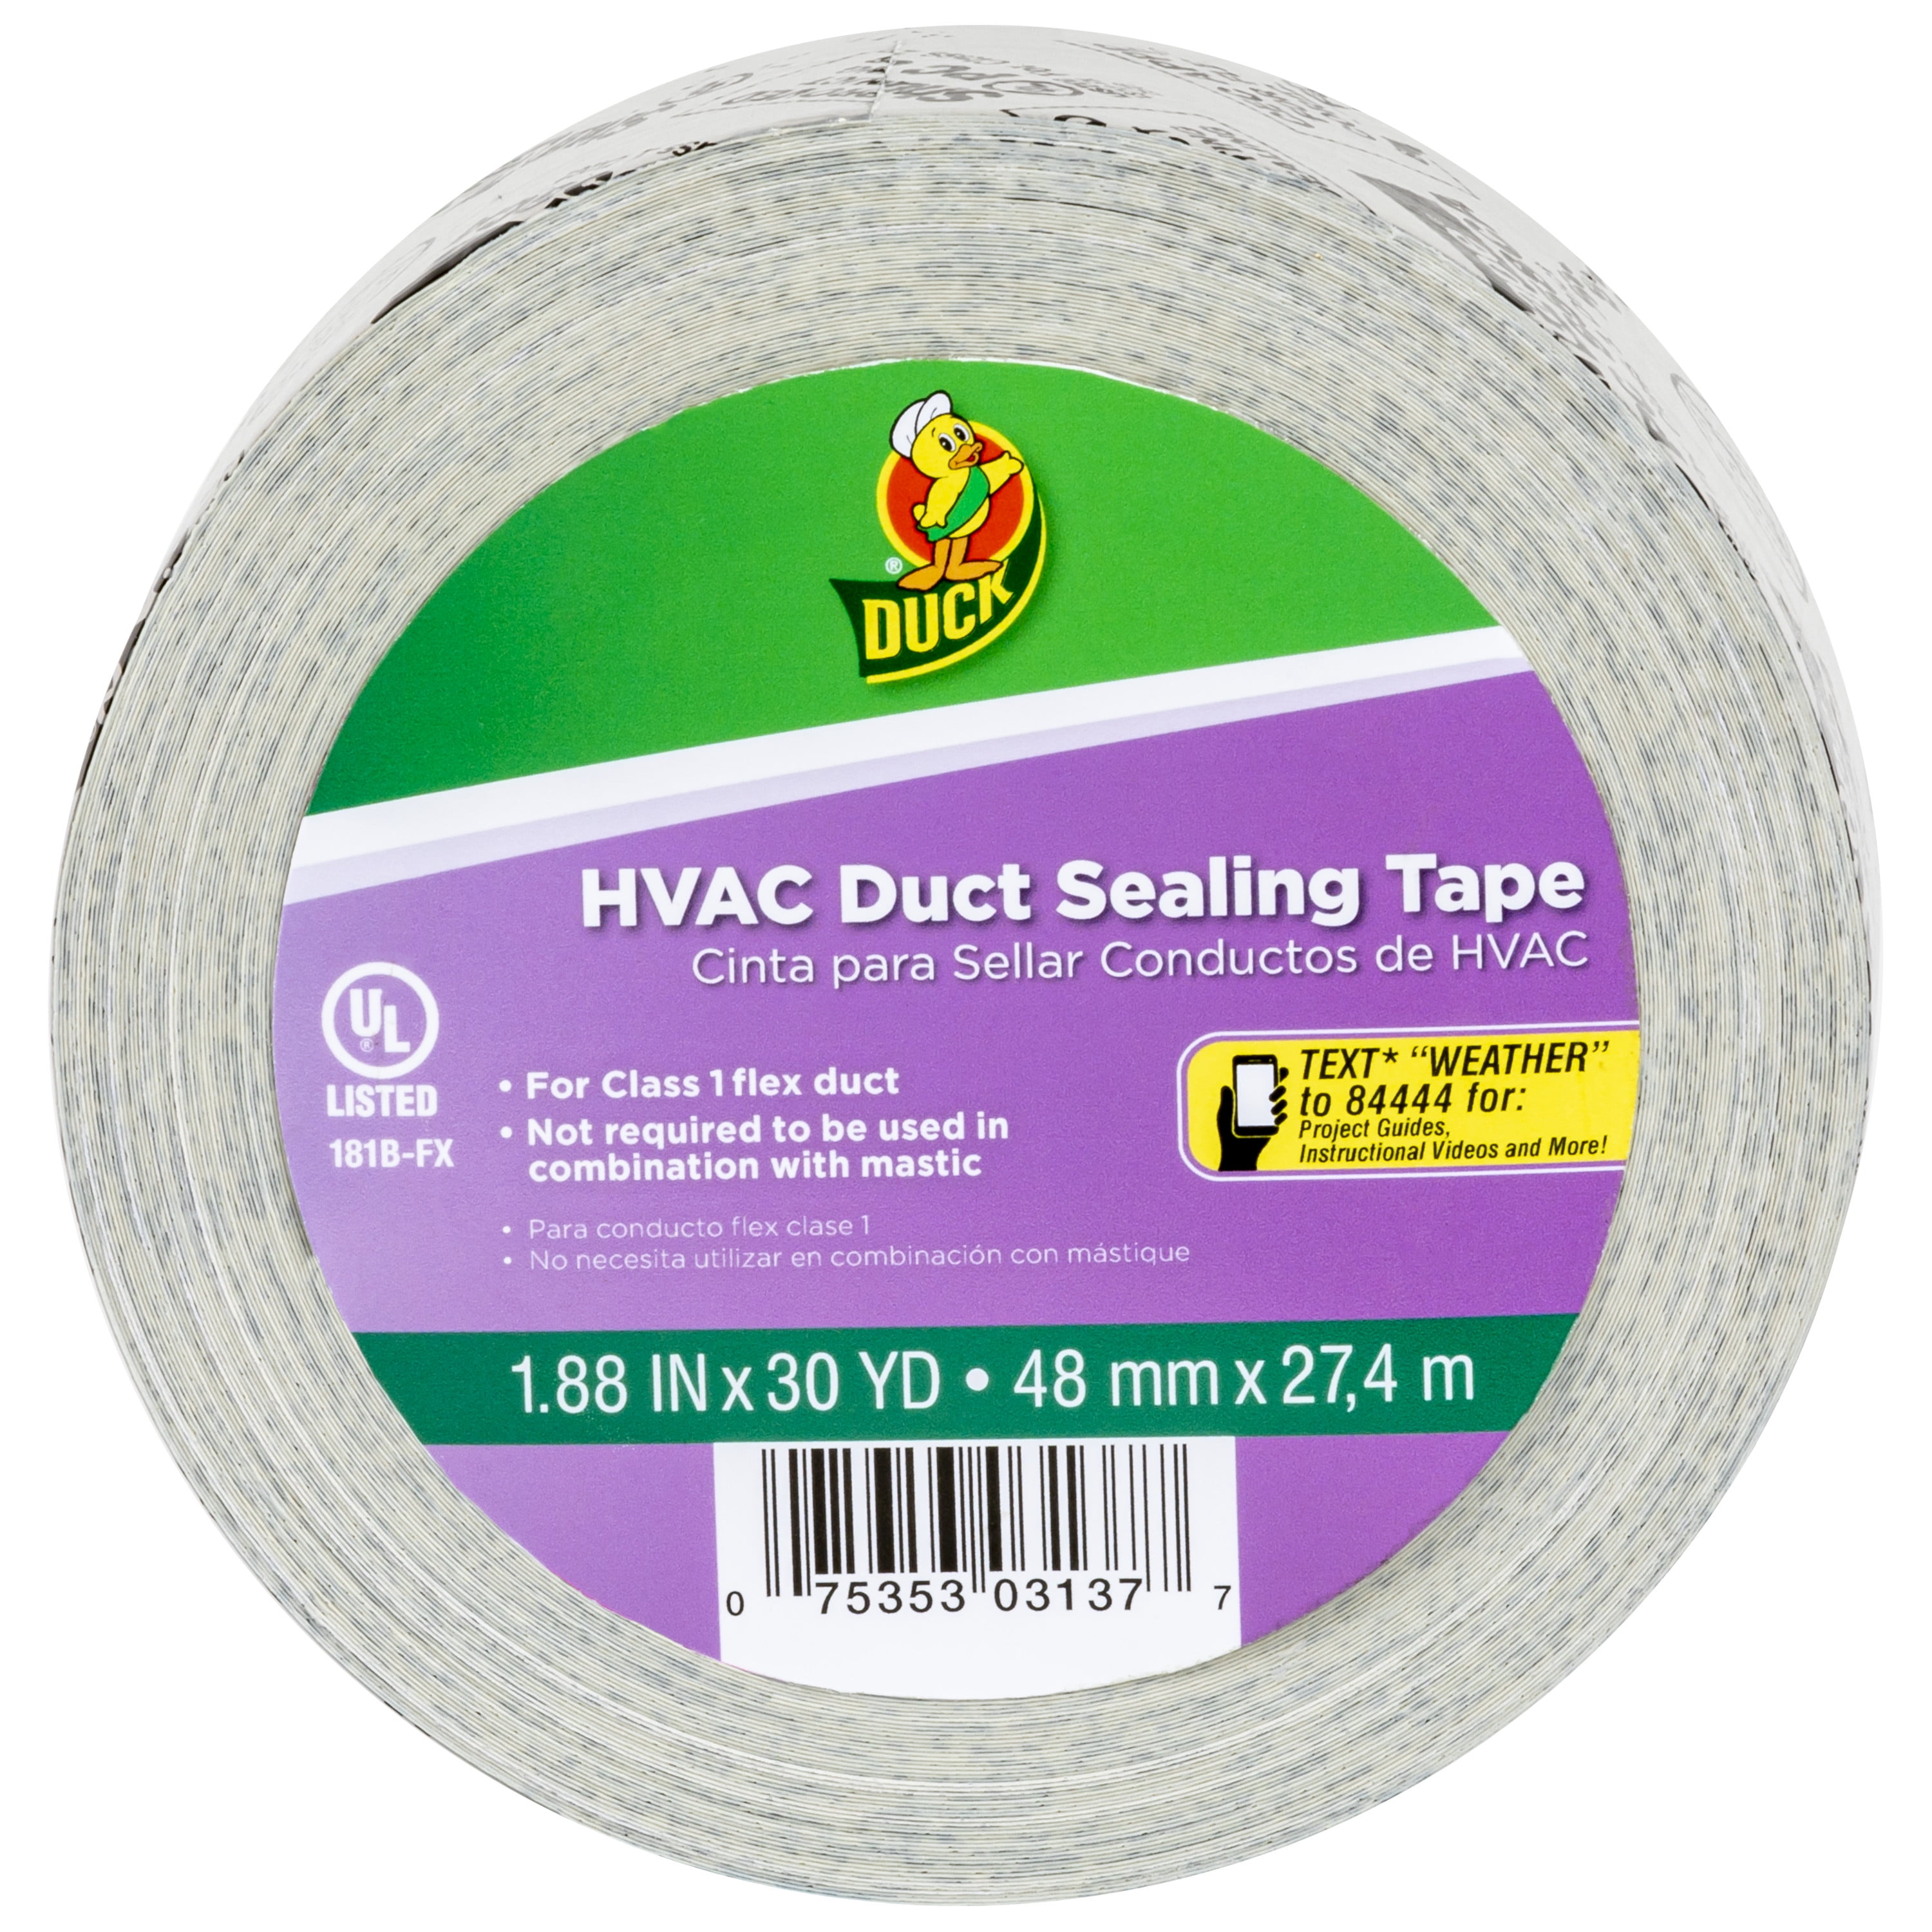 Duck Brand HVAC Duct Sealing Tape Silver 1.88 Inches x 30 Yards 1 Roll 14045... 